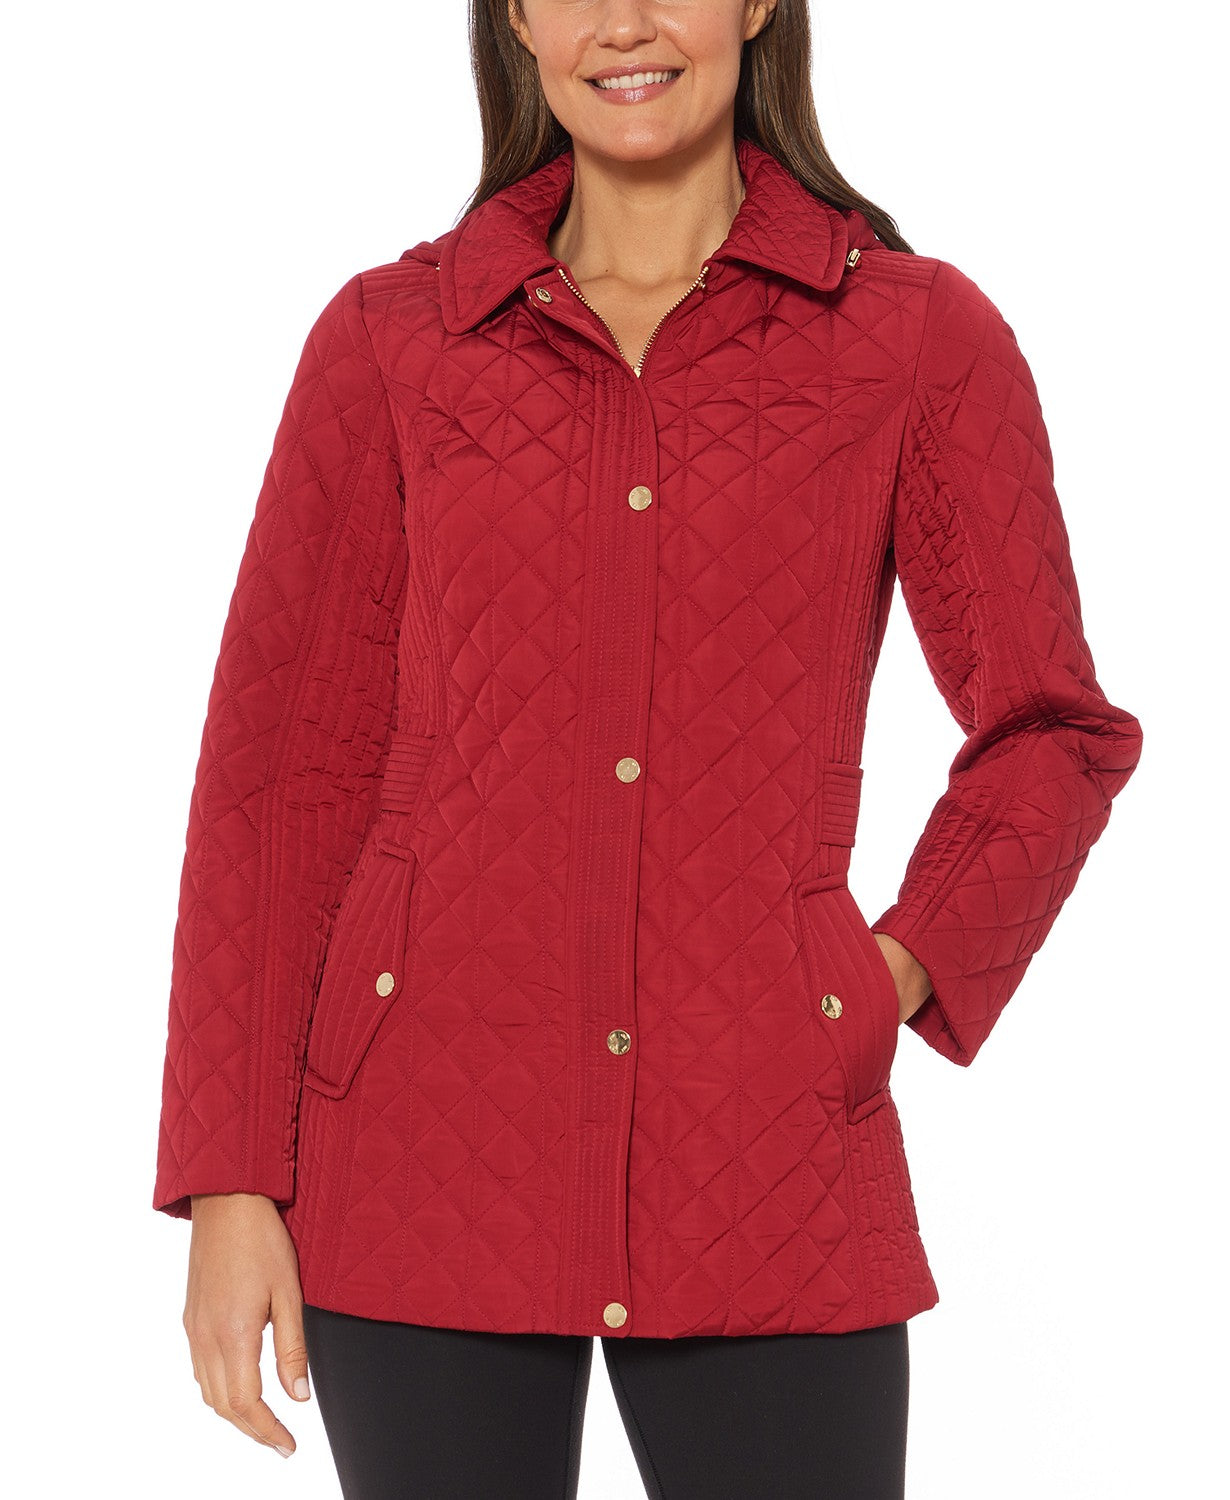 Jones New York Womens Hooded Quilted Jacket XS Solid Red